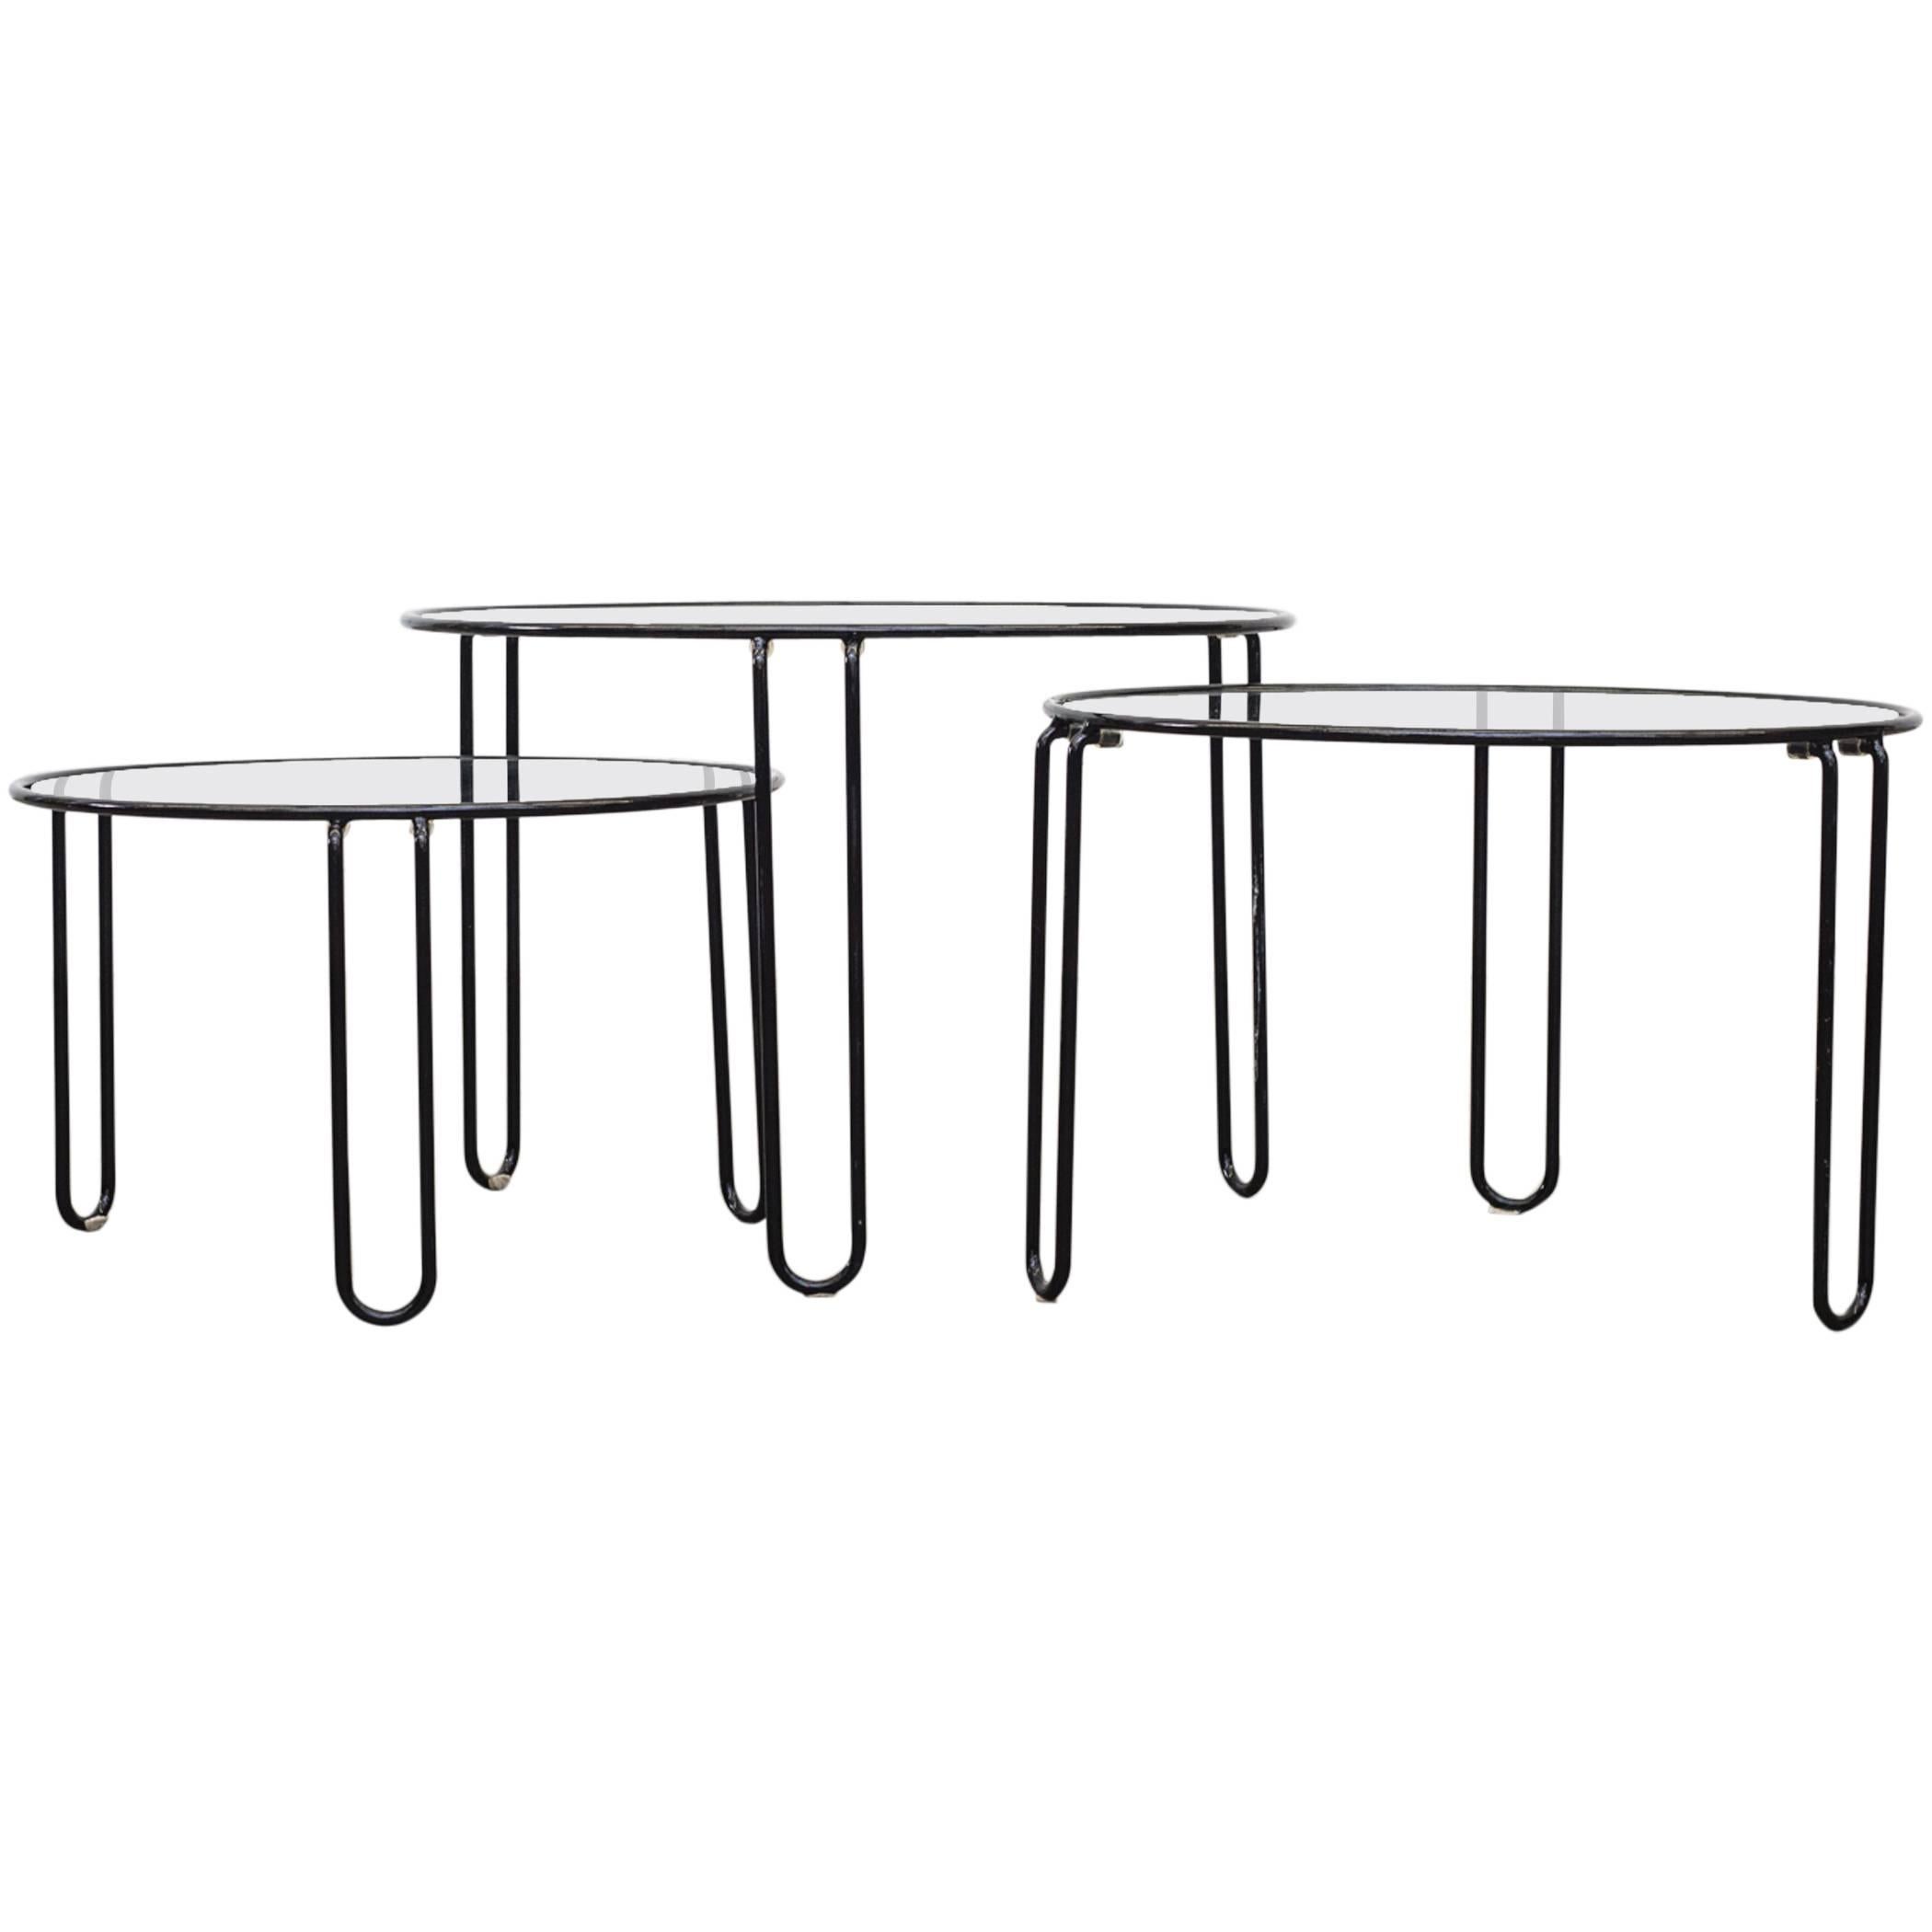 Set of Three Round Wire Modernist Nesting Tables with Inset Glass